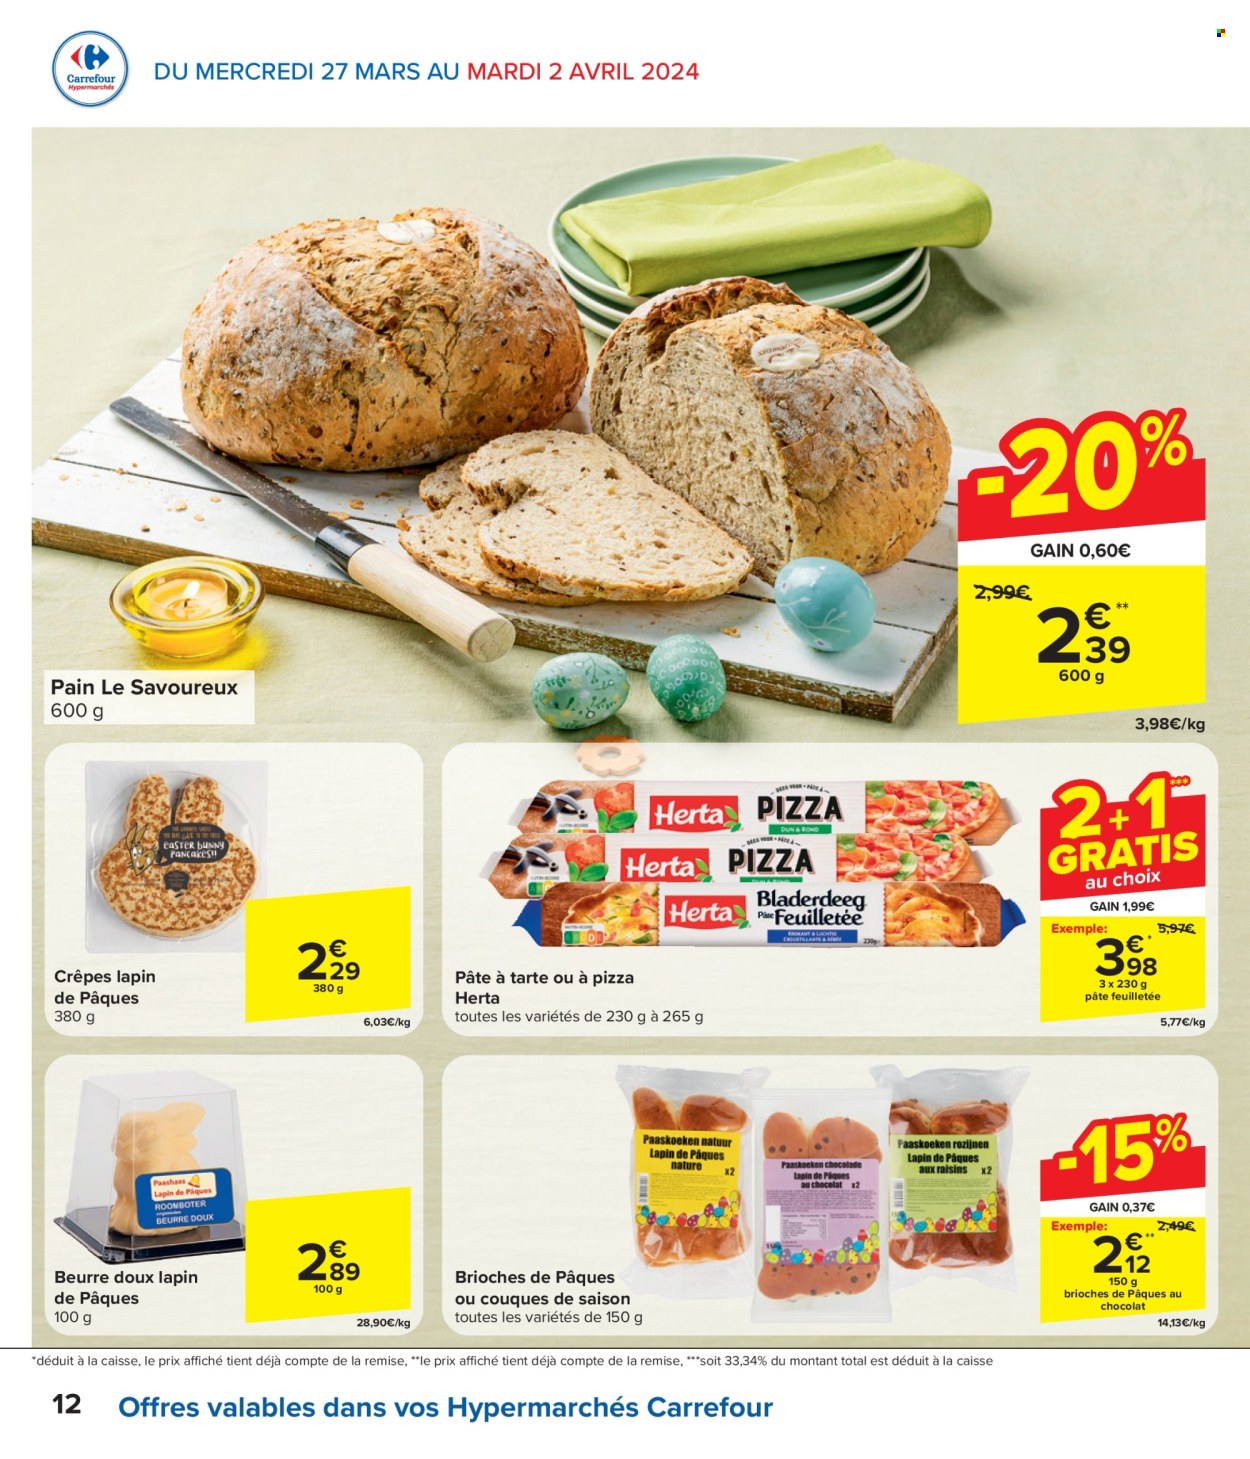 Catalogue Carrefour hypermarkt - 27.3.2024 - 8.4.2024. Page 12.